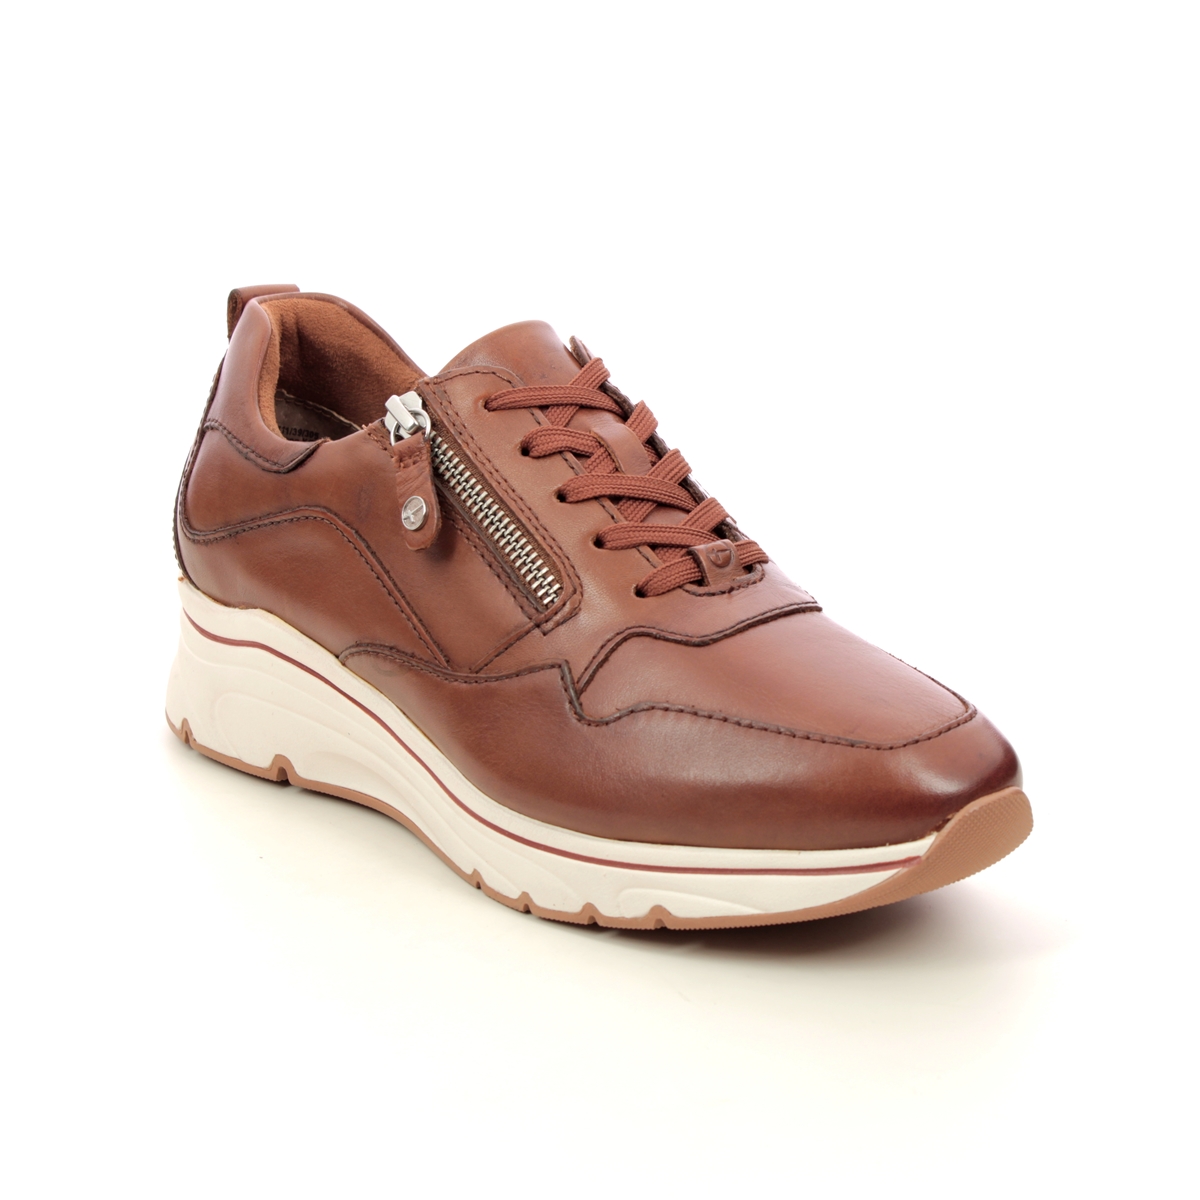 Tamaris Vinnie Tan Leather  Womens Trainers 23711-39-305 In Size 36 In Plain Tan Leather